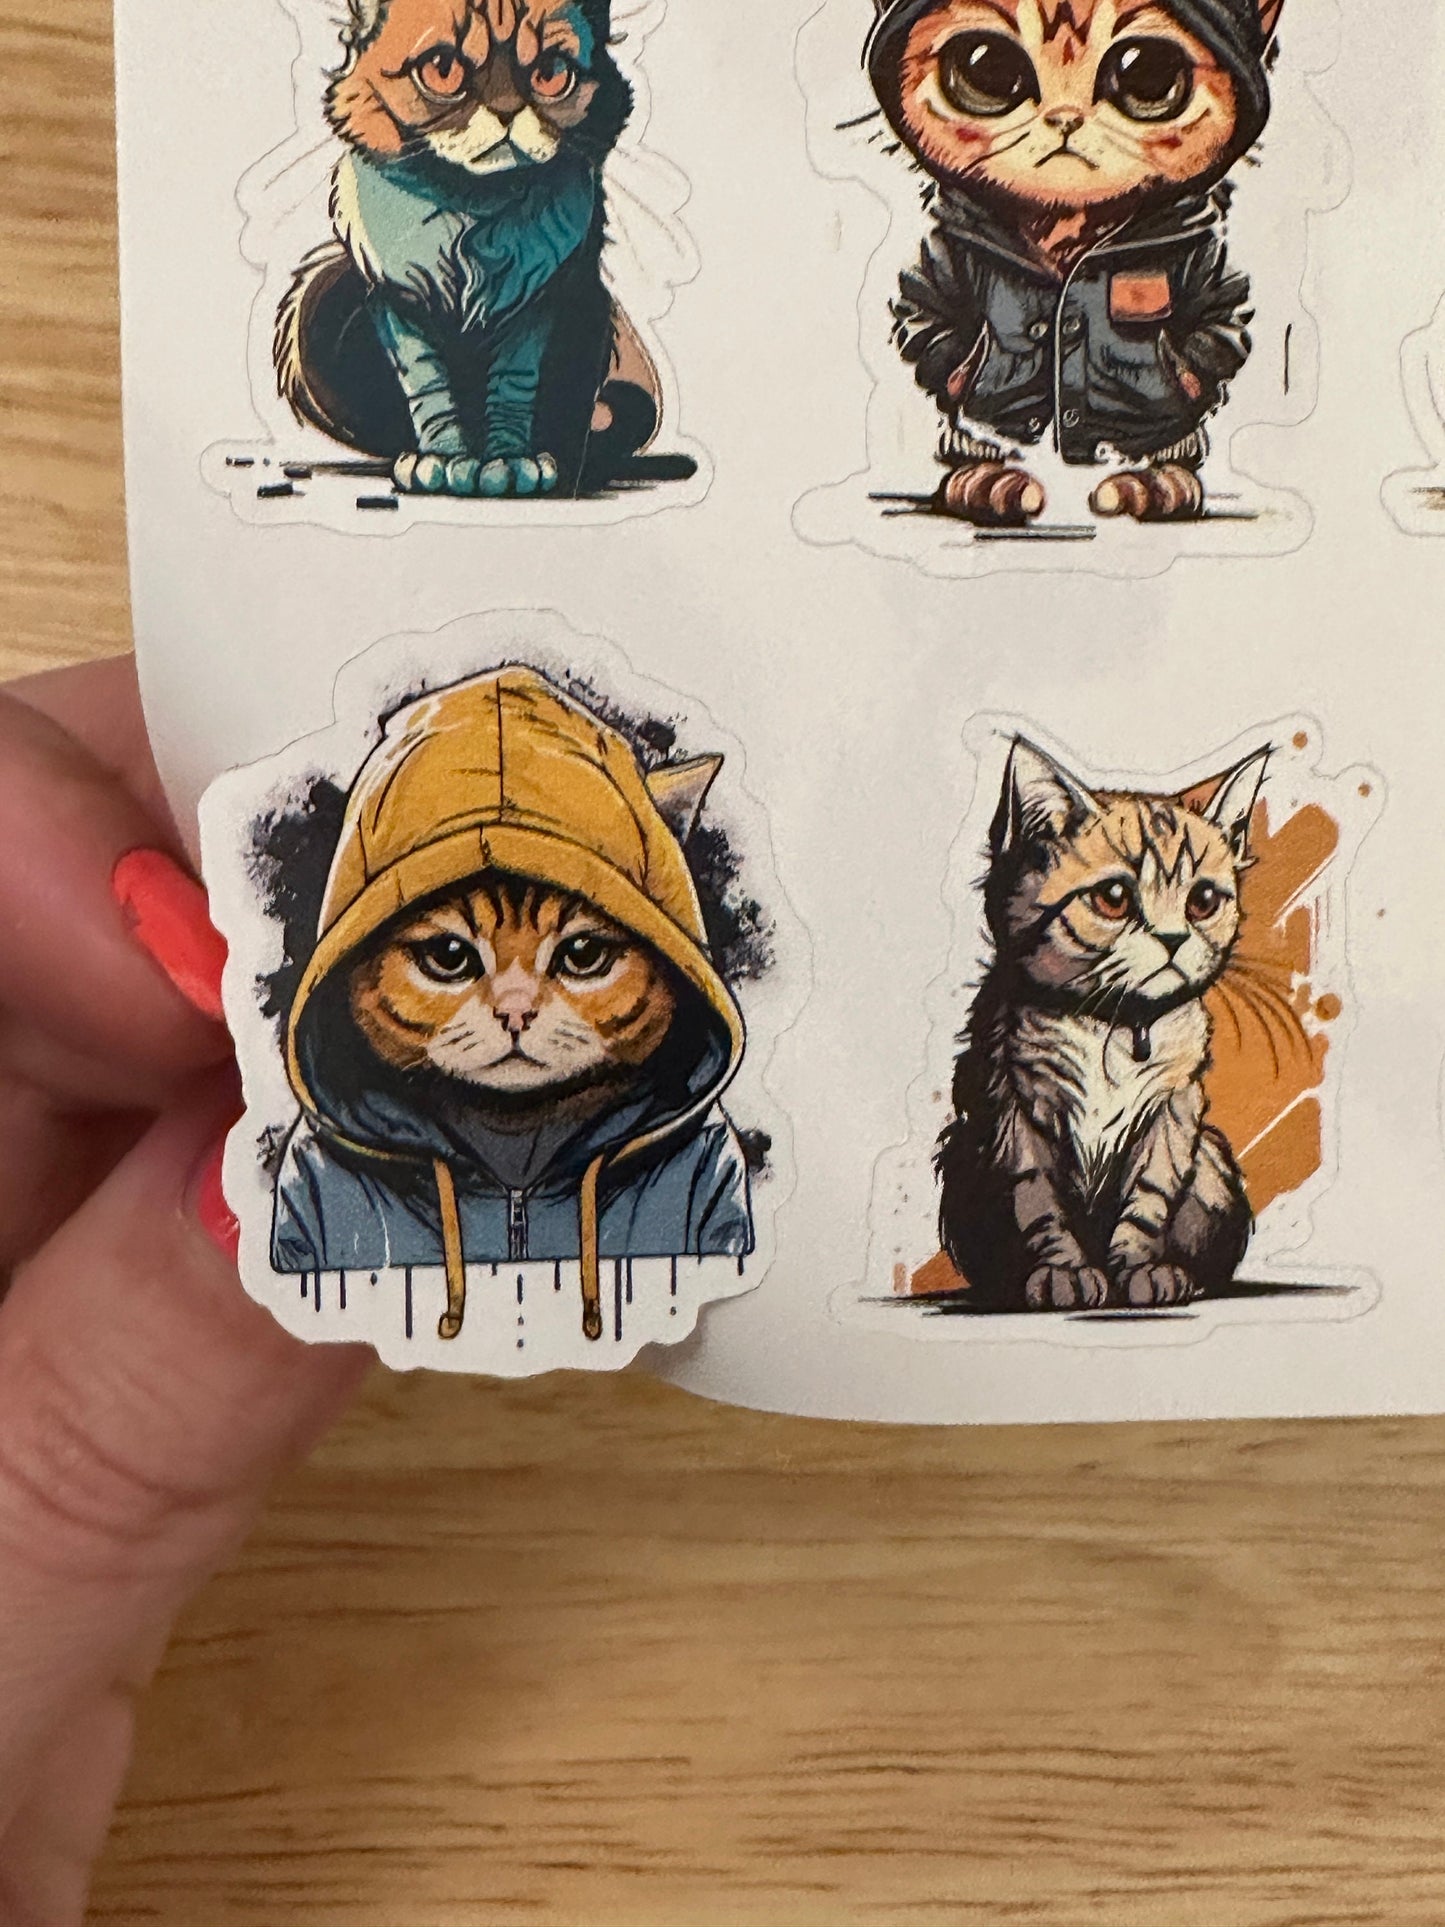 Hooded Cat Planner STICKER, Cute Cat Planner Sticker, Cats with Jackets on stickers